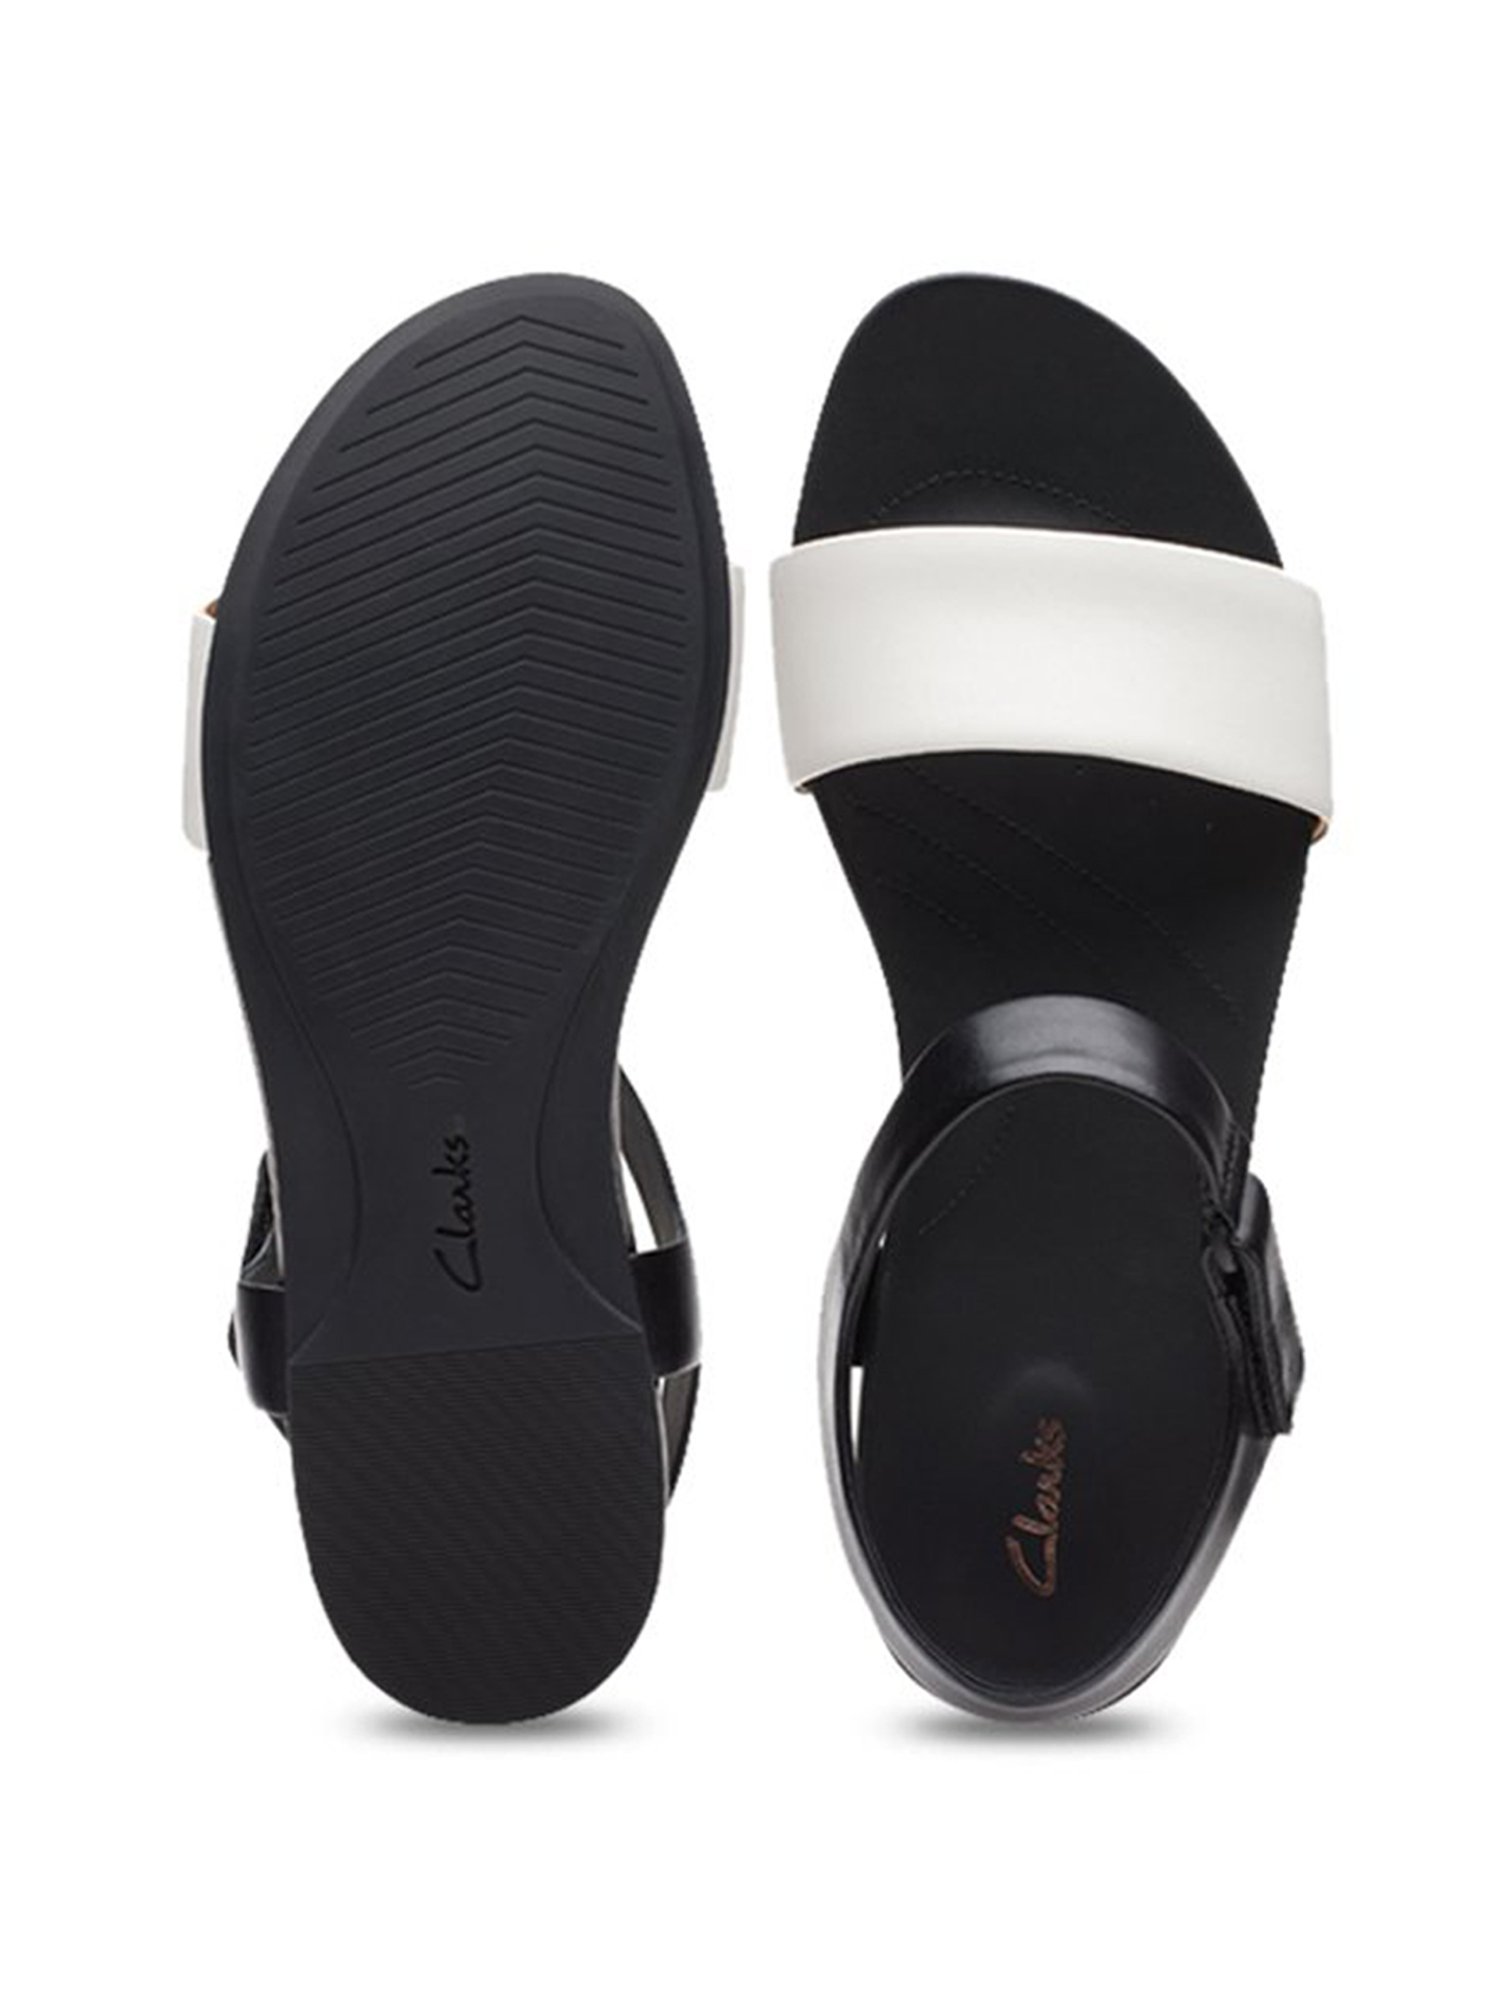 Buy Clarks Bright Pacey & White Ankle Strap for Women at Best Price @ CLiQ